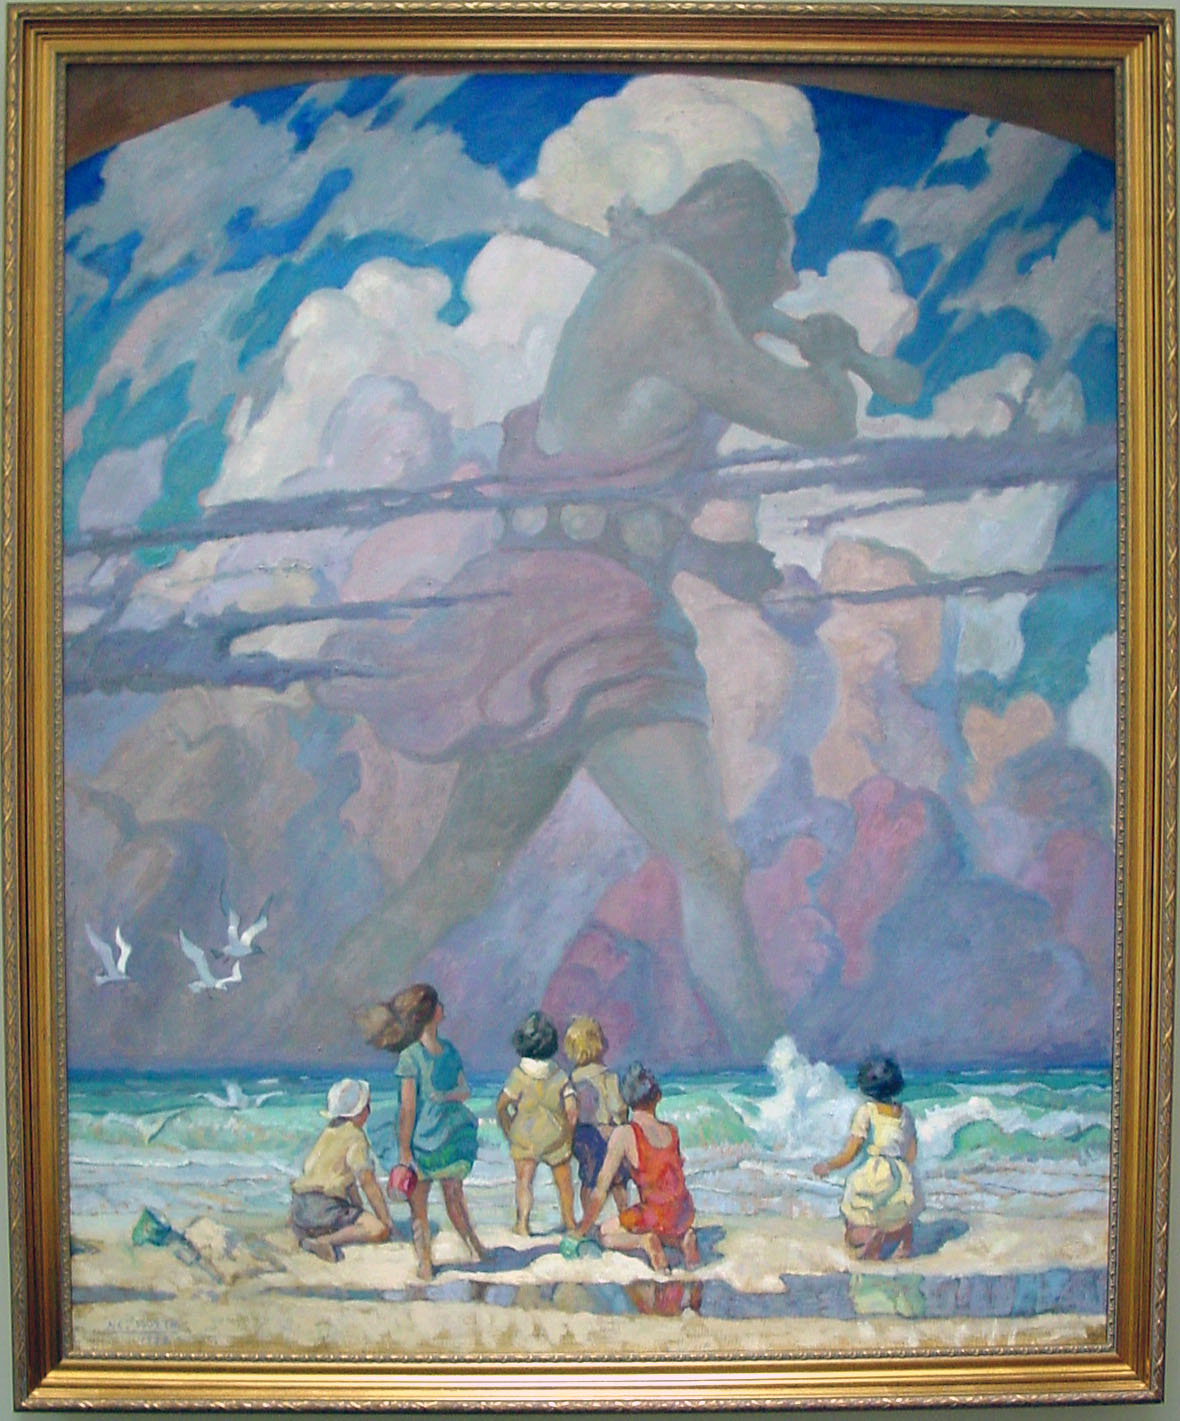  'the giant' by n. c. weyth (1923) 